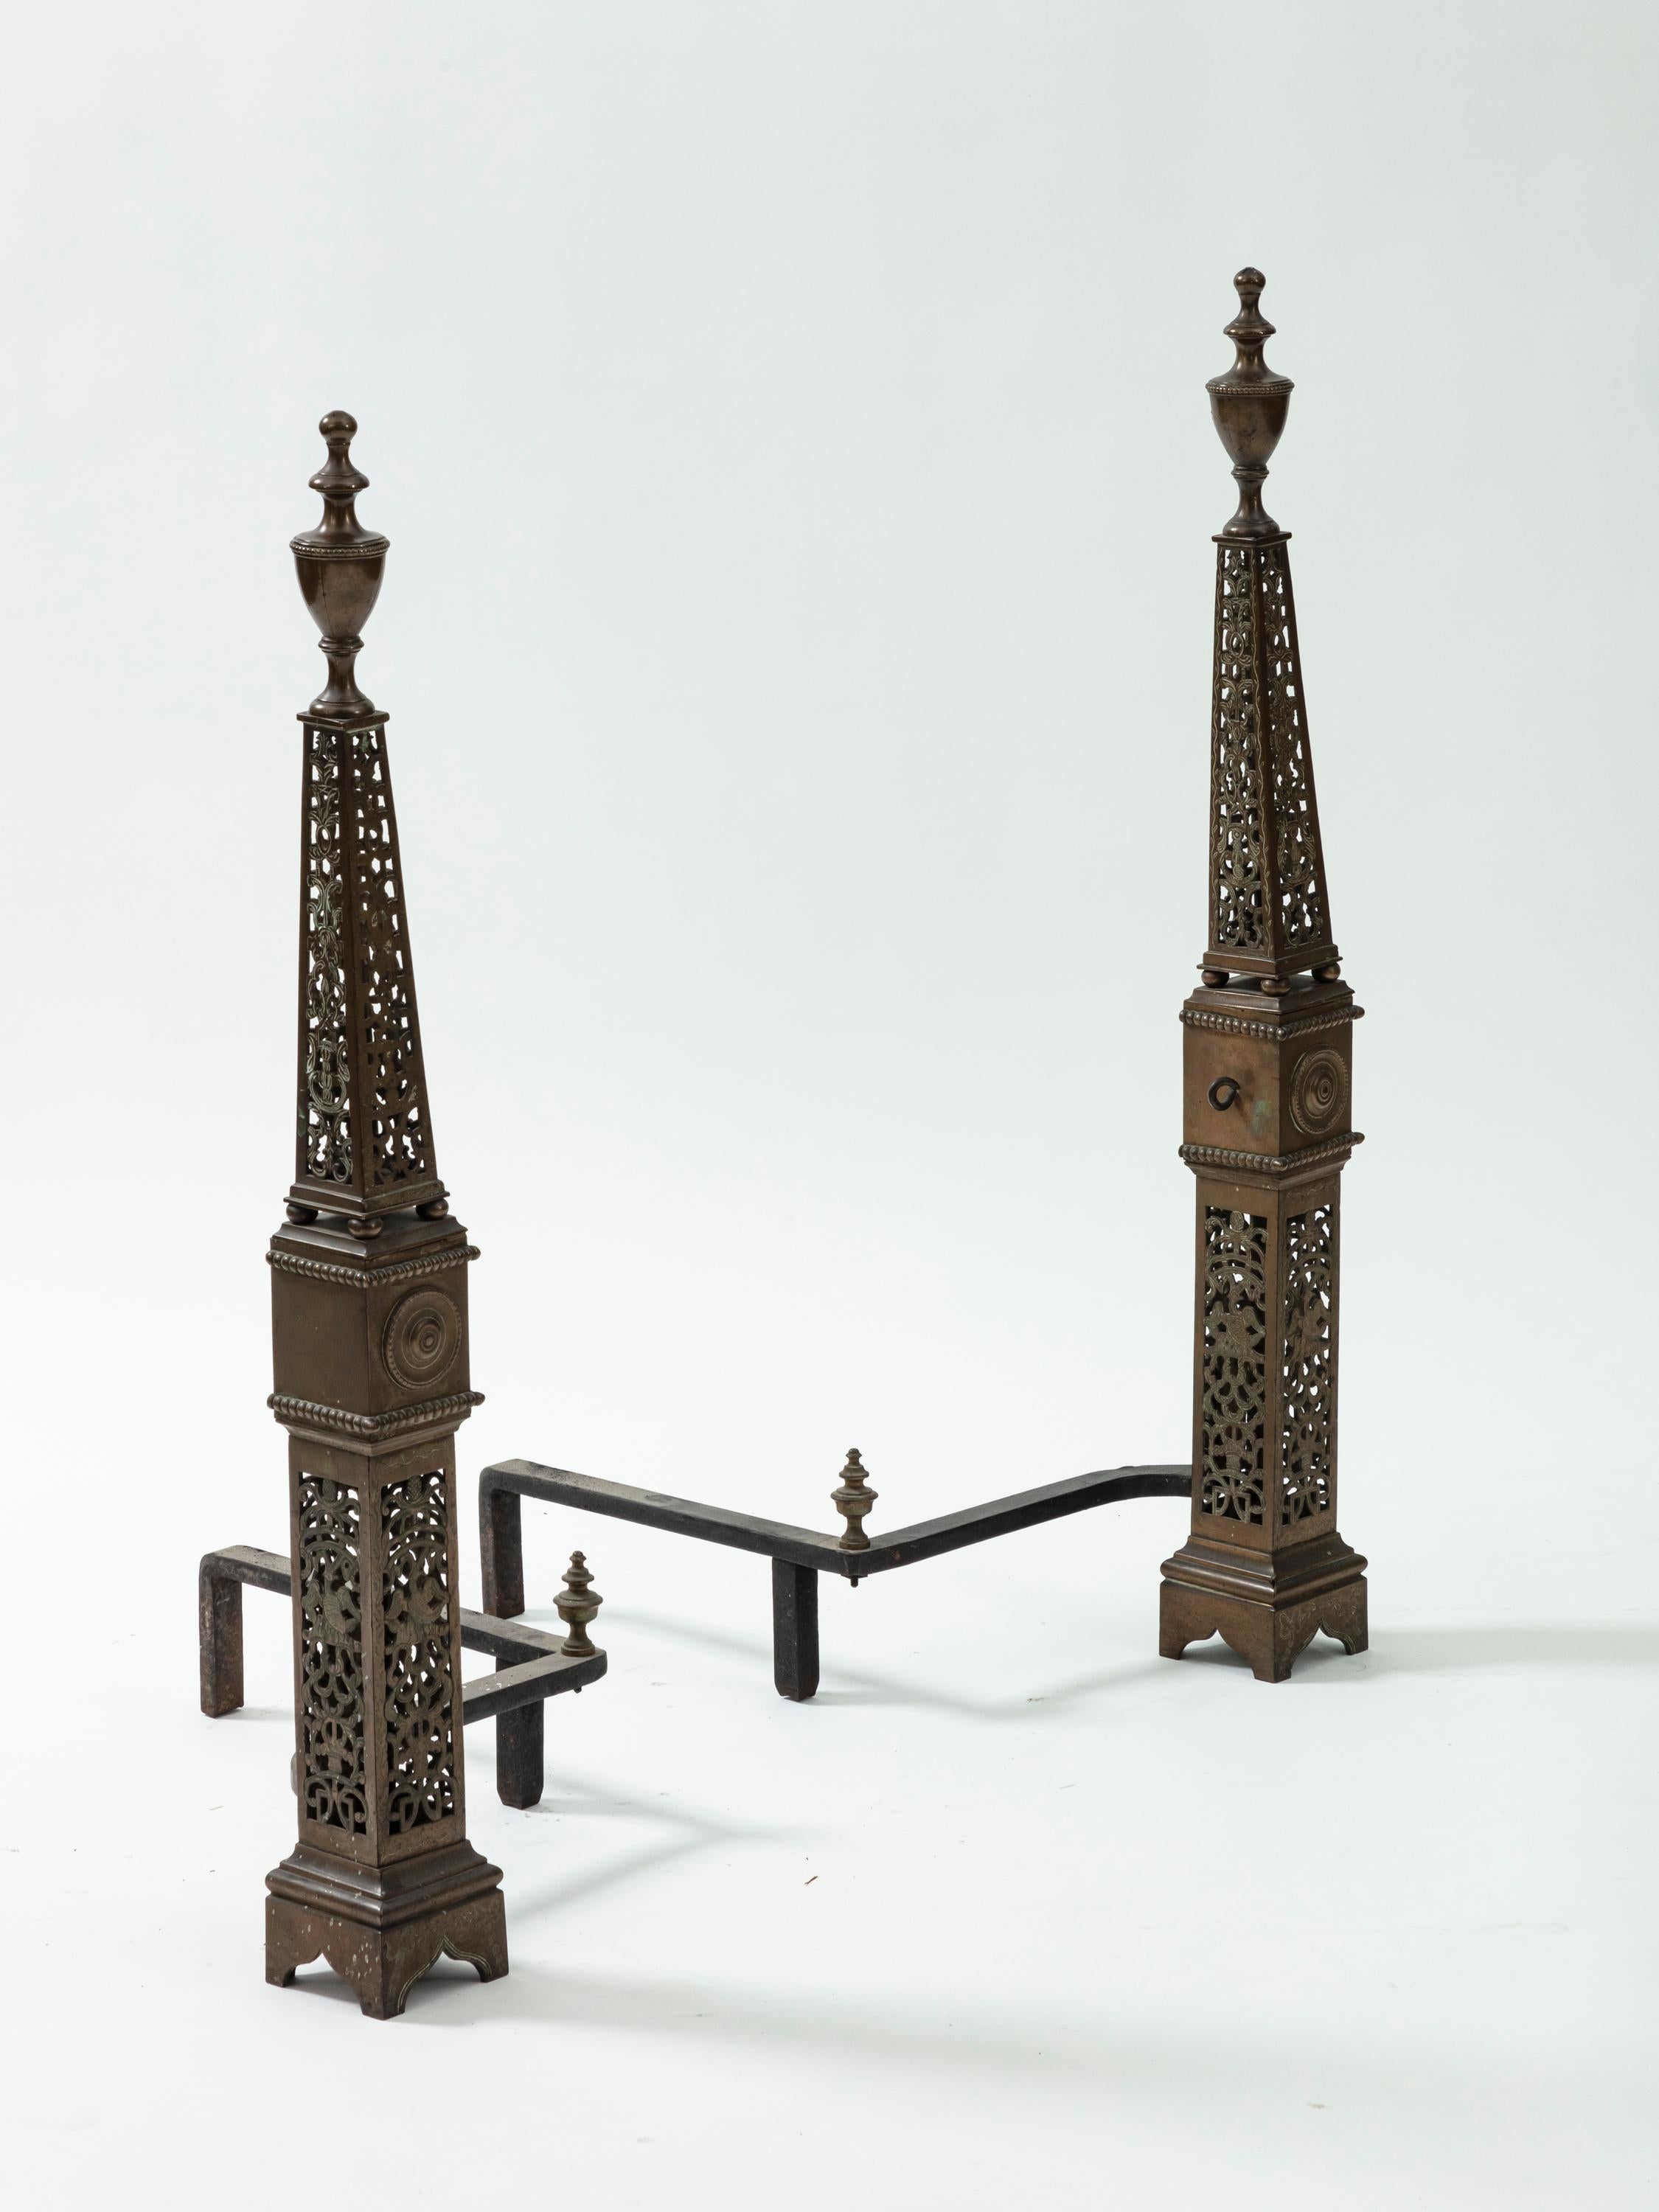 Pair of English George III bronze andirons. Fine openwork in chiseled bronze in the shape of an obelisk. England, circa 1820.